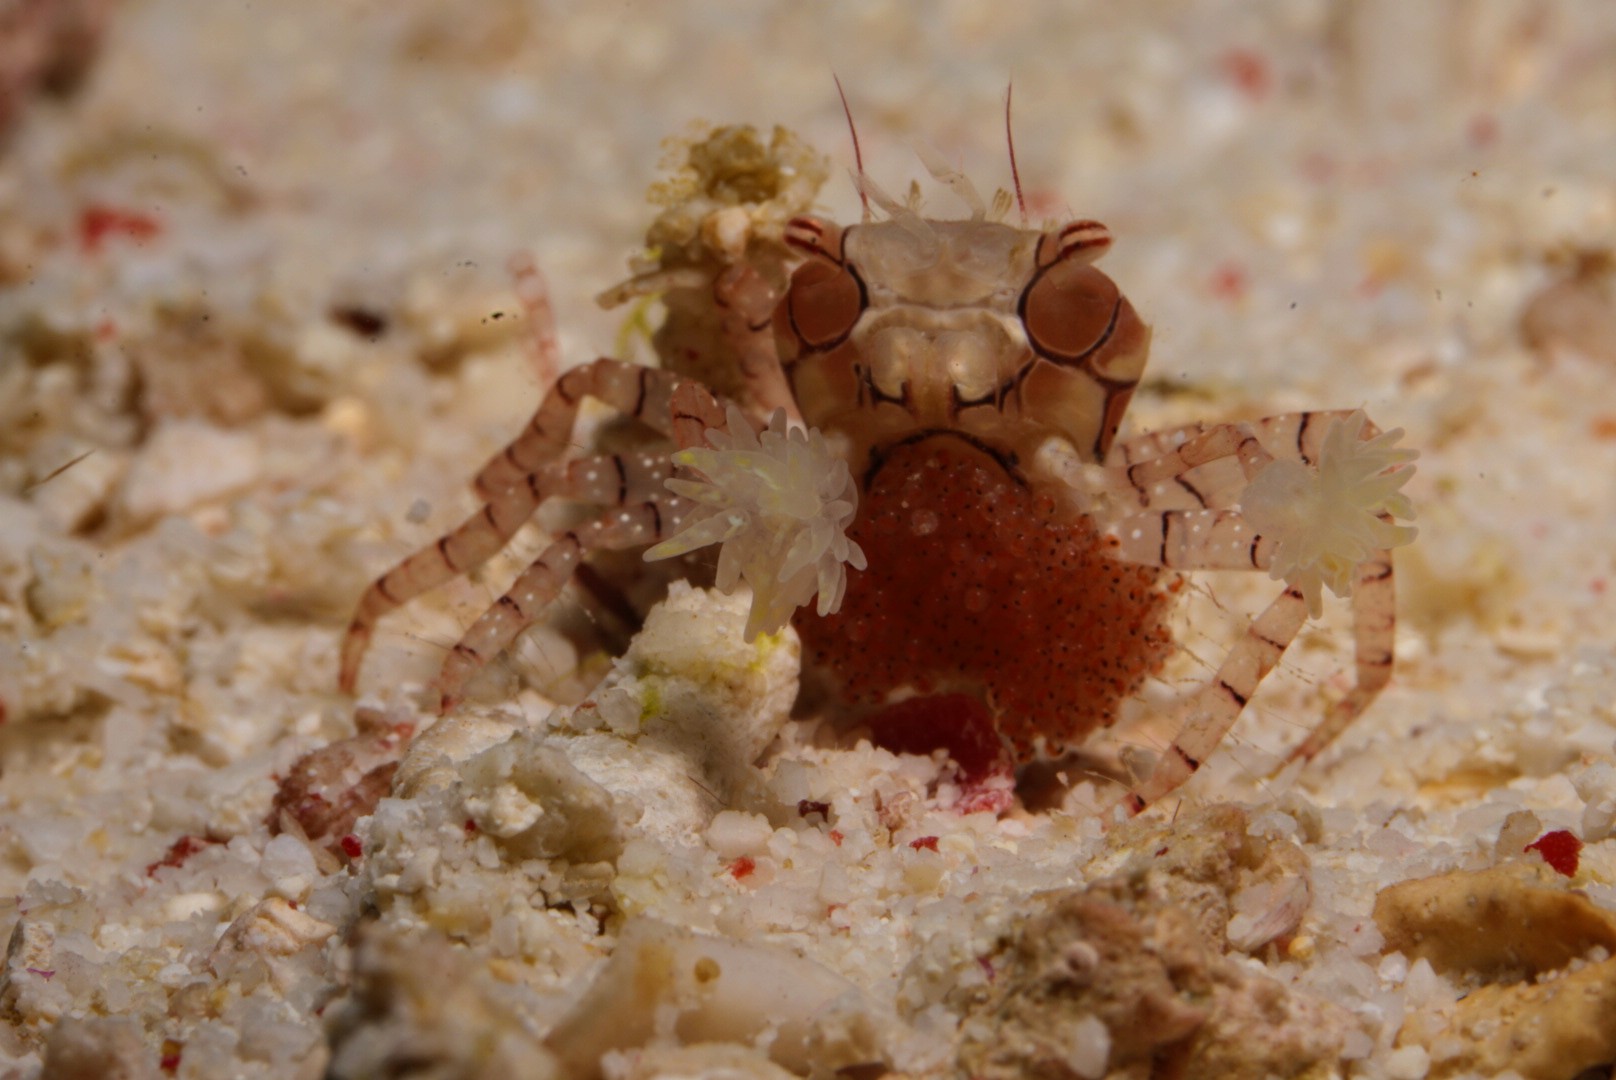 Like a chearleader, the Pompom/Boxer Crab waved his fluffy pompoms around.